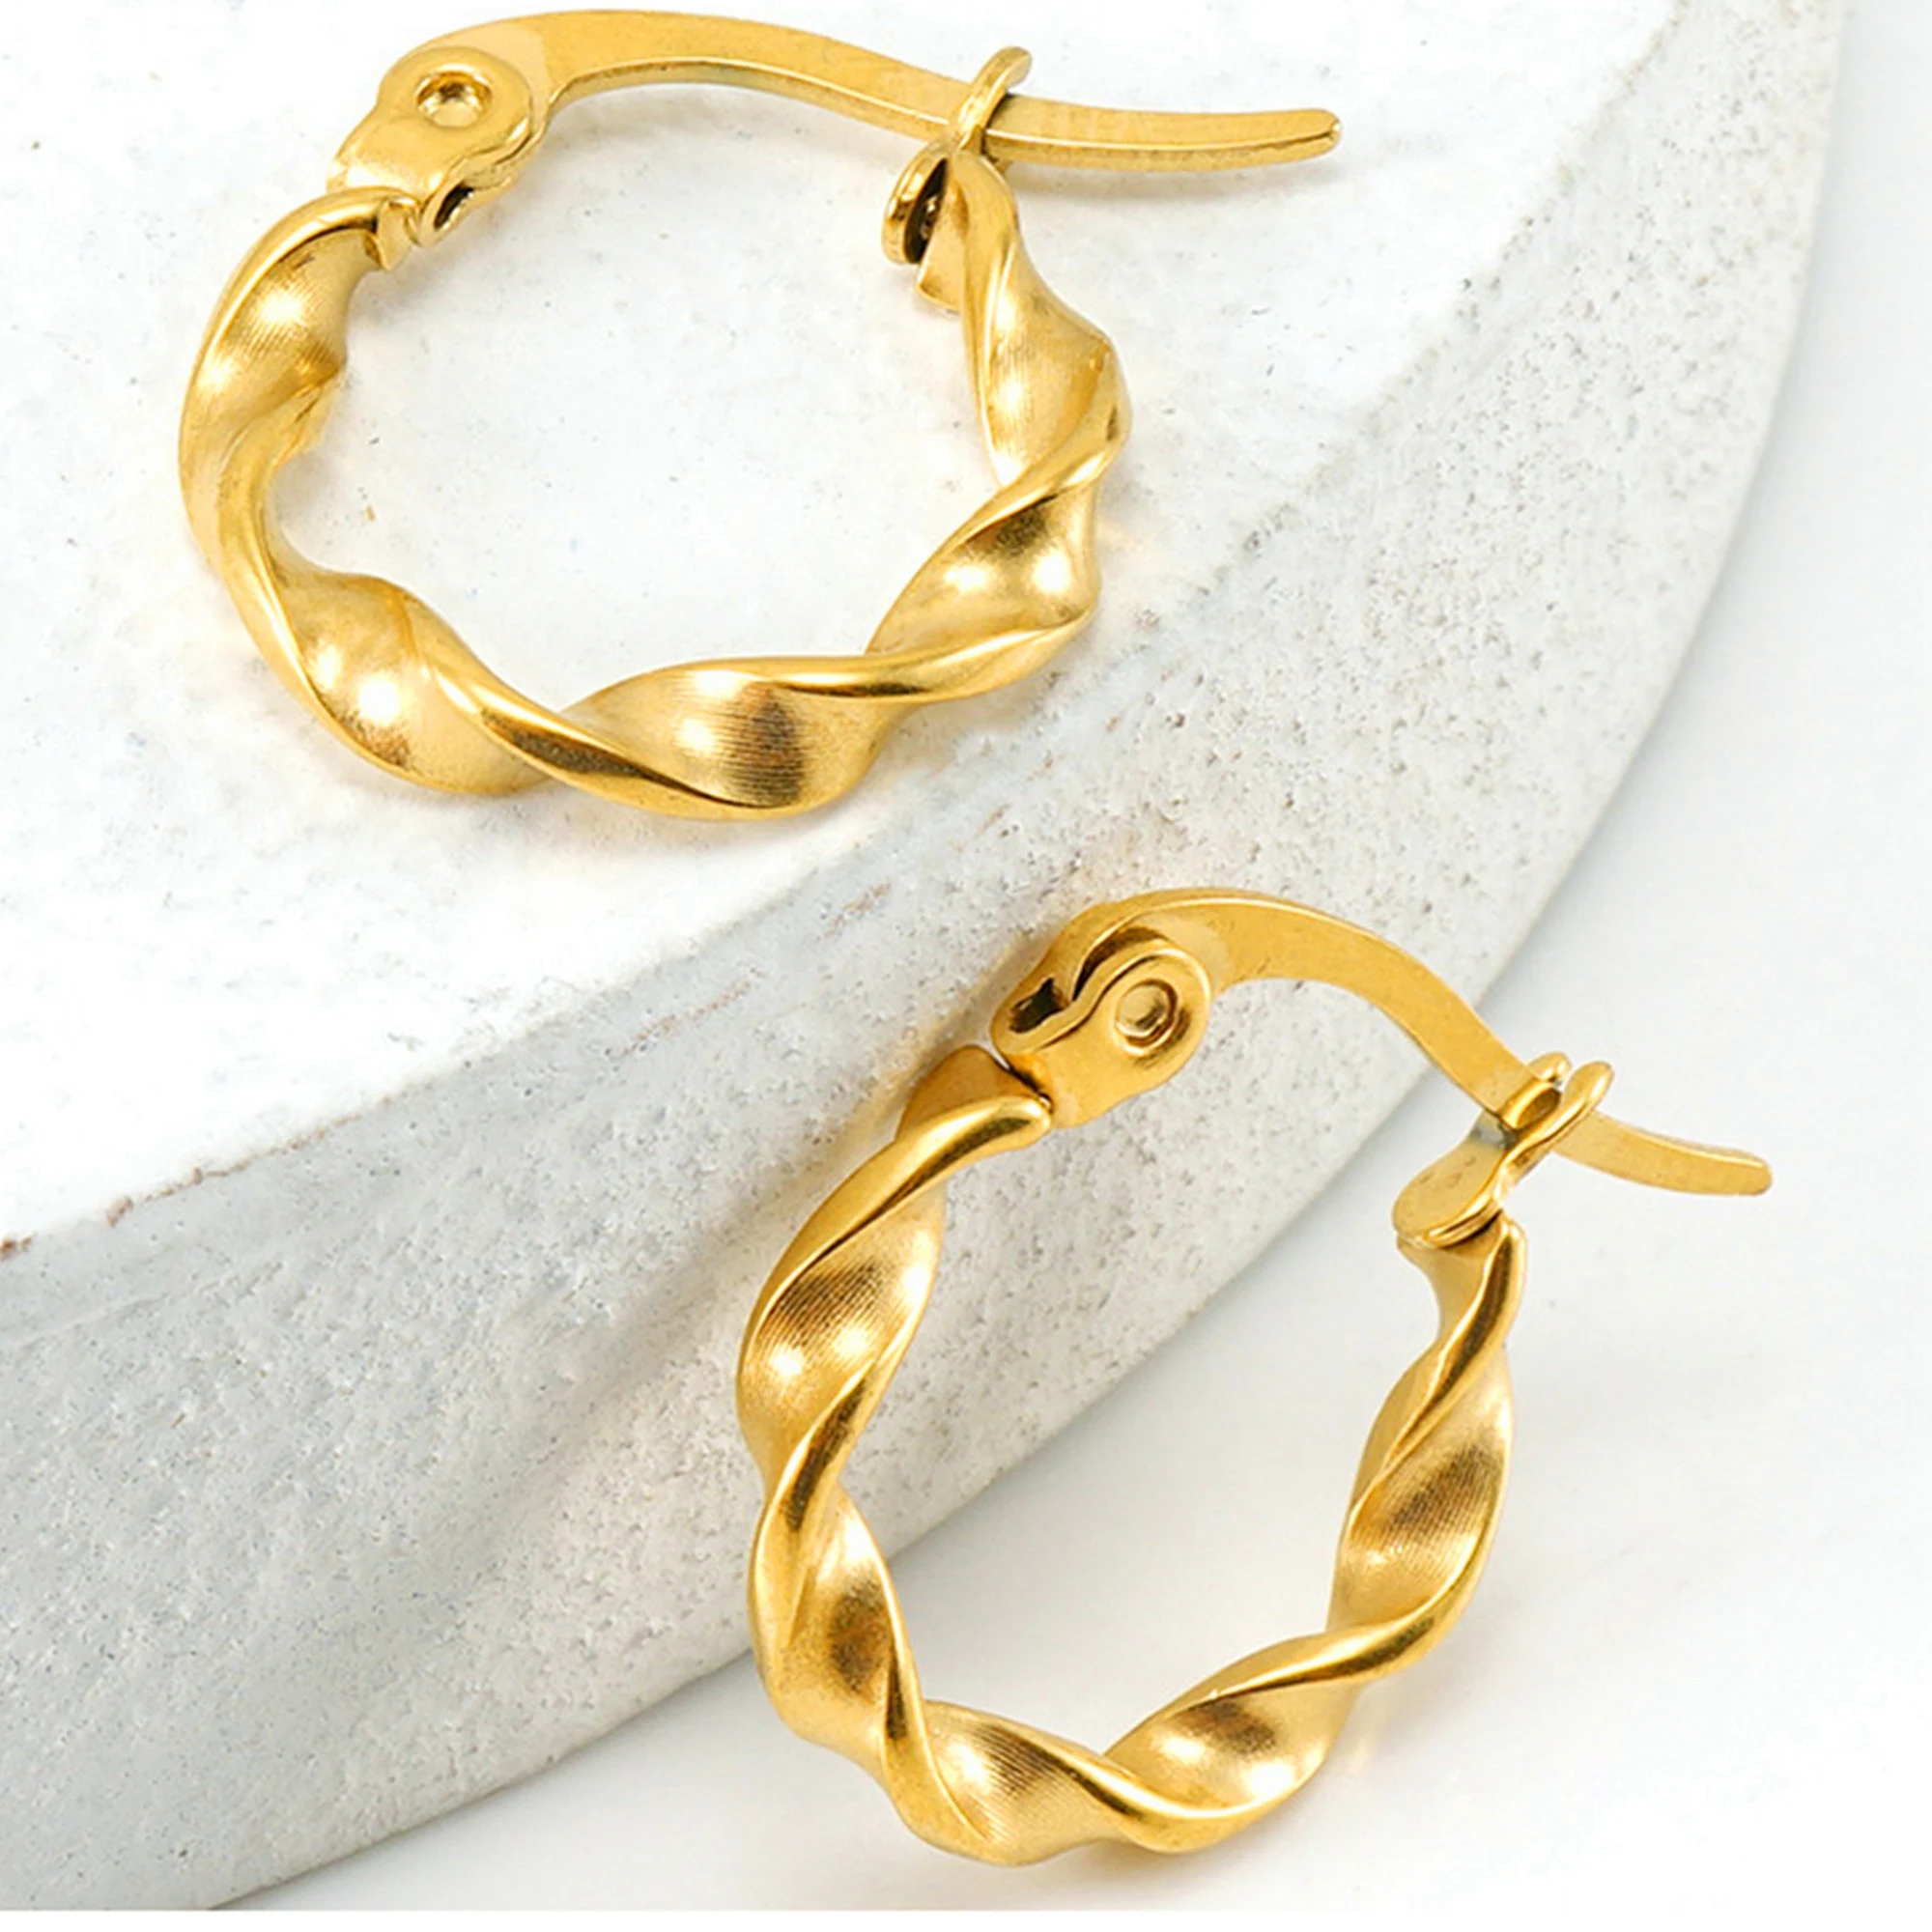 

Spiral Twisted Cshaped Earrings For Women 18K Goldtone Stainless Steel Snap Closure Ear Studs And Ear Accessories